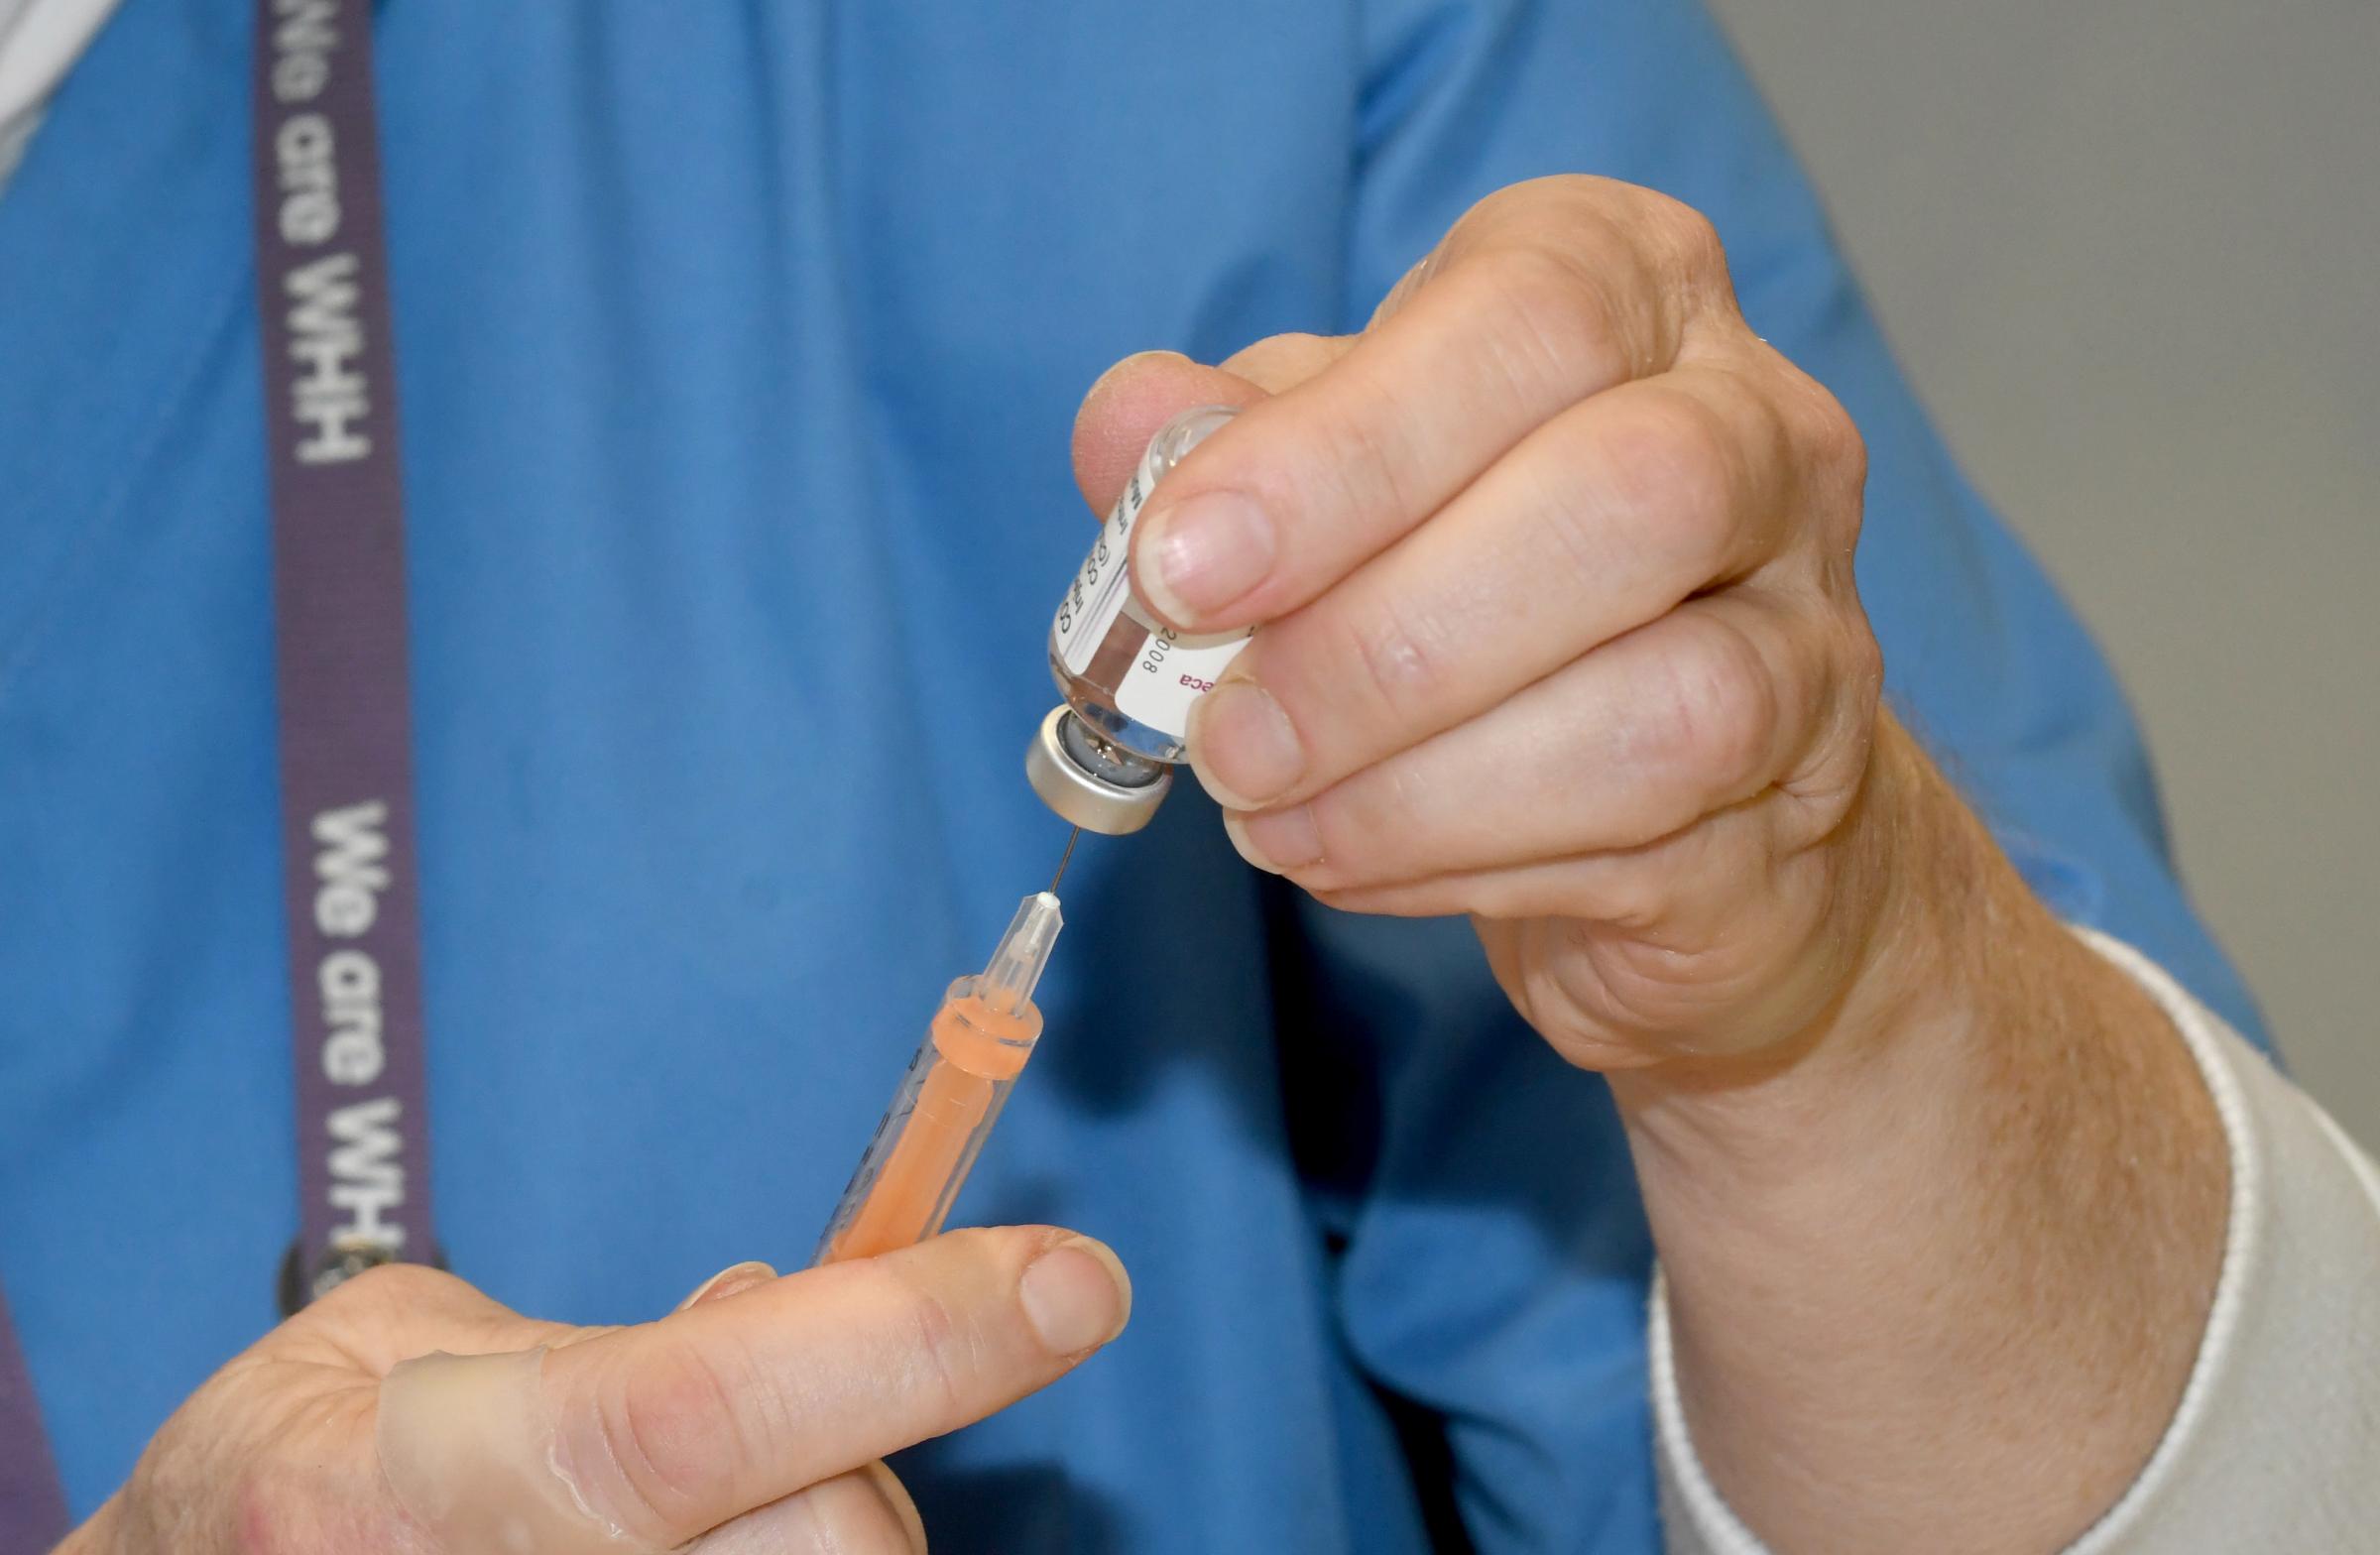 Residents are encouraged to get a Covid vaccine if they have not already done so